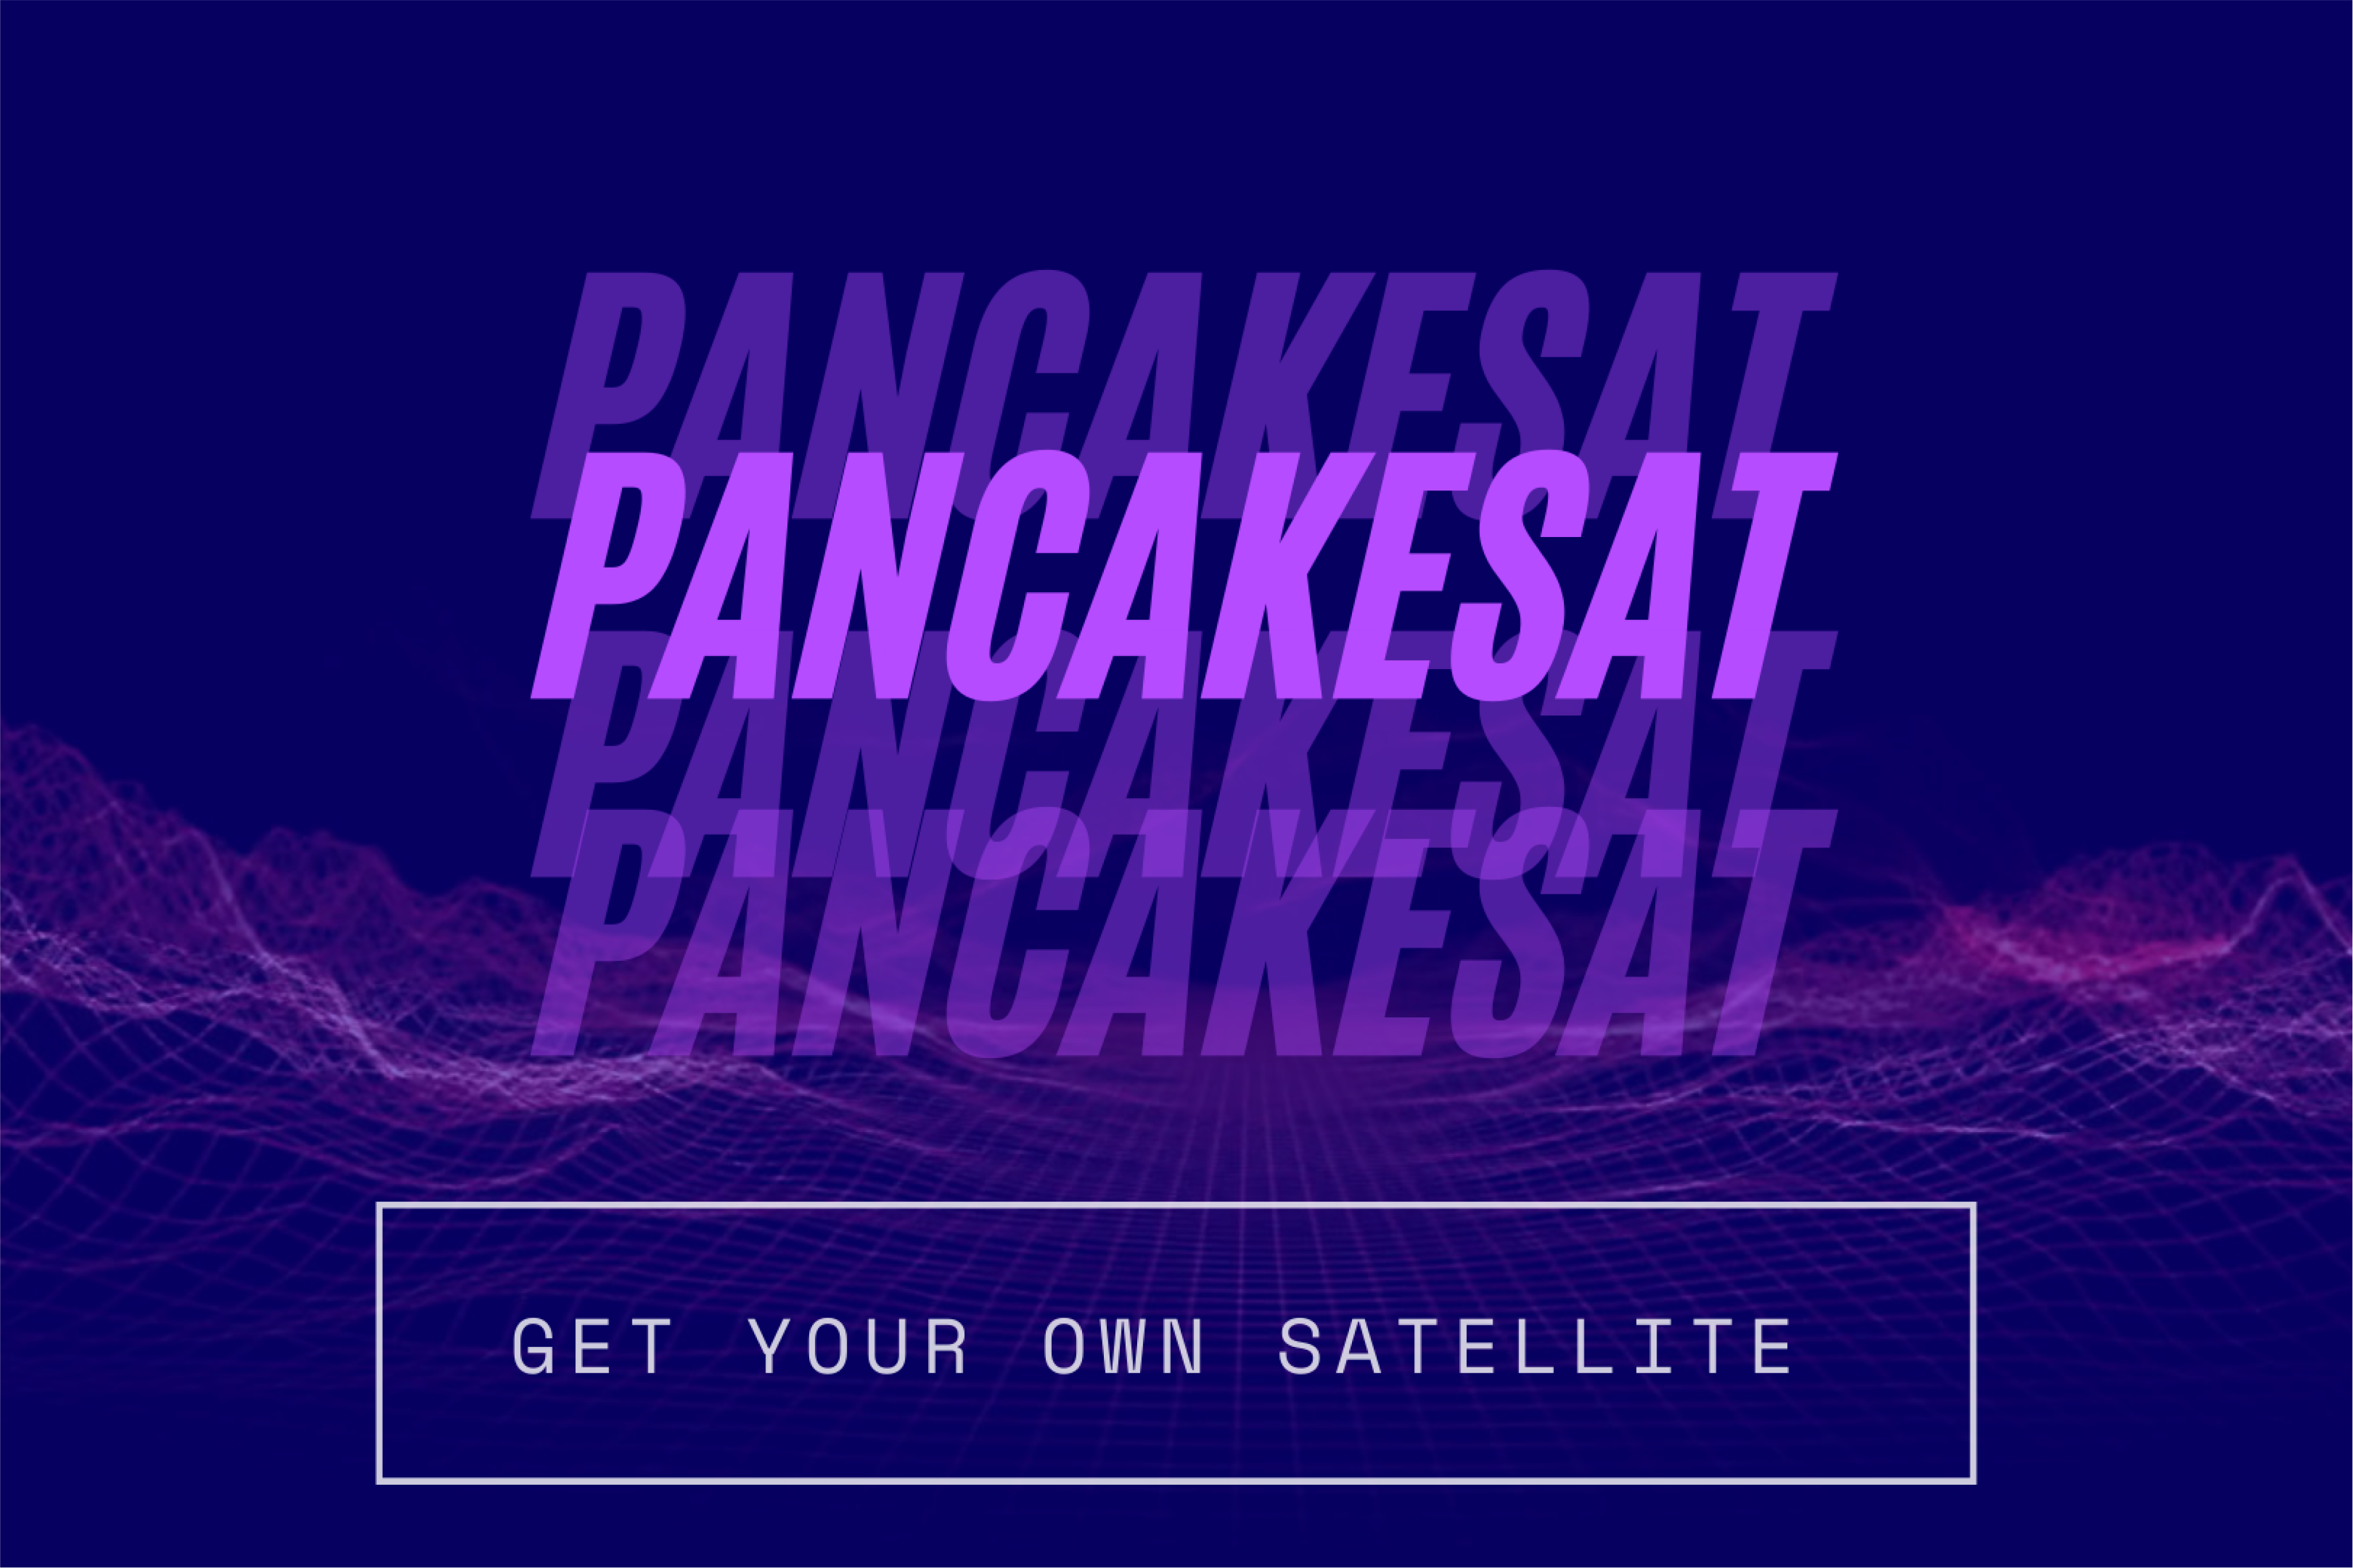 PancakeSat cover for ucluster